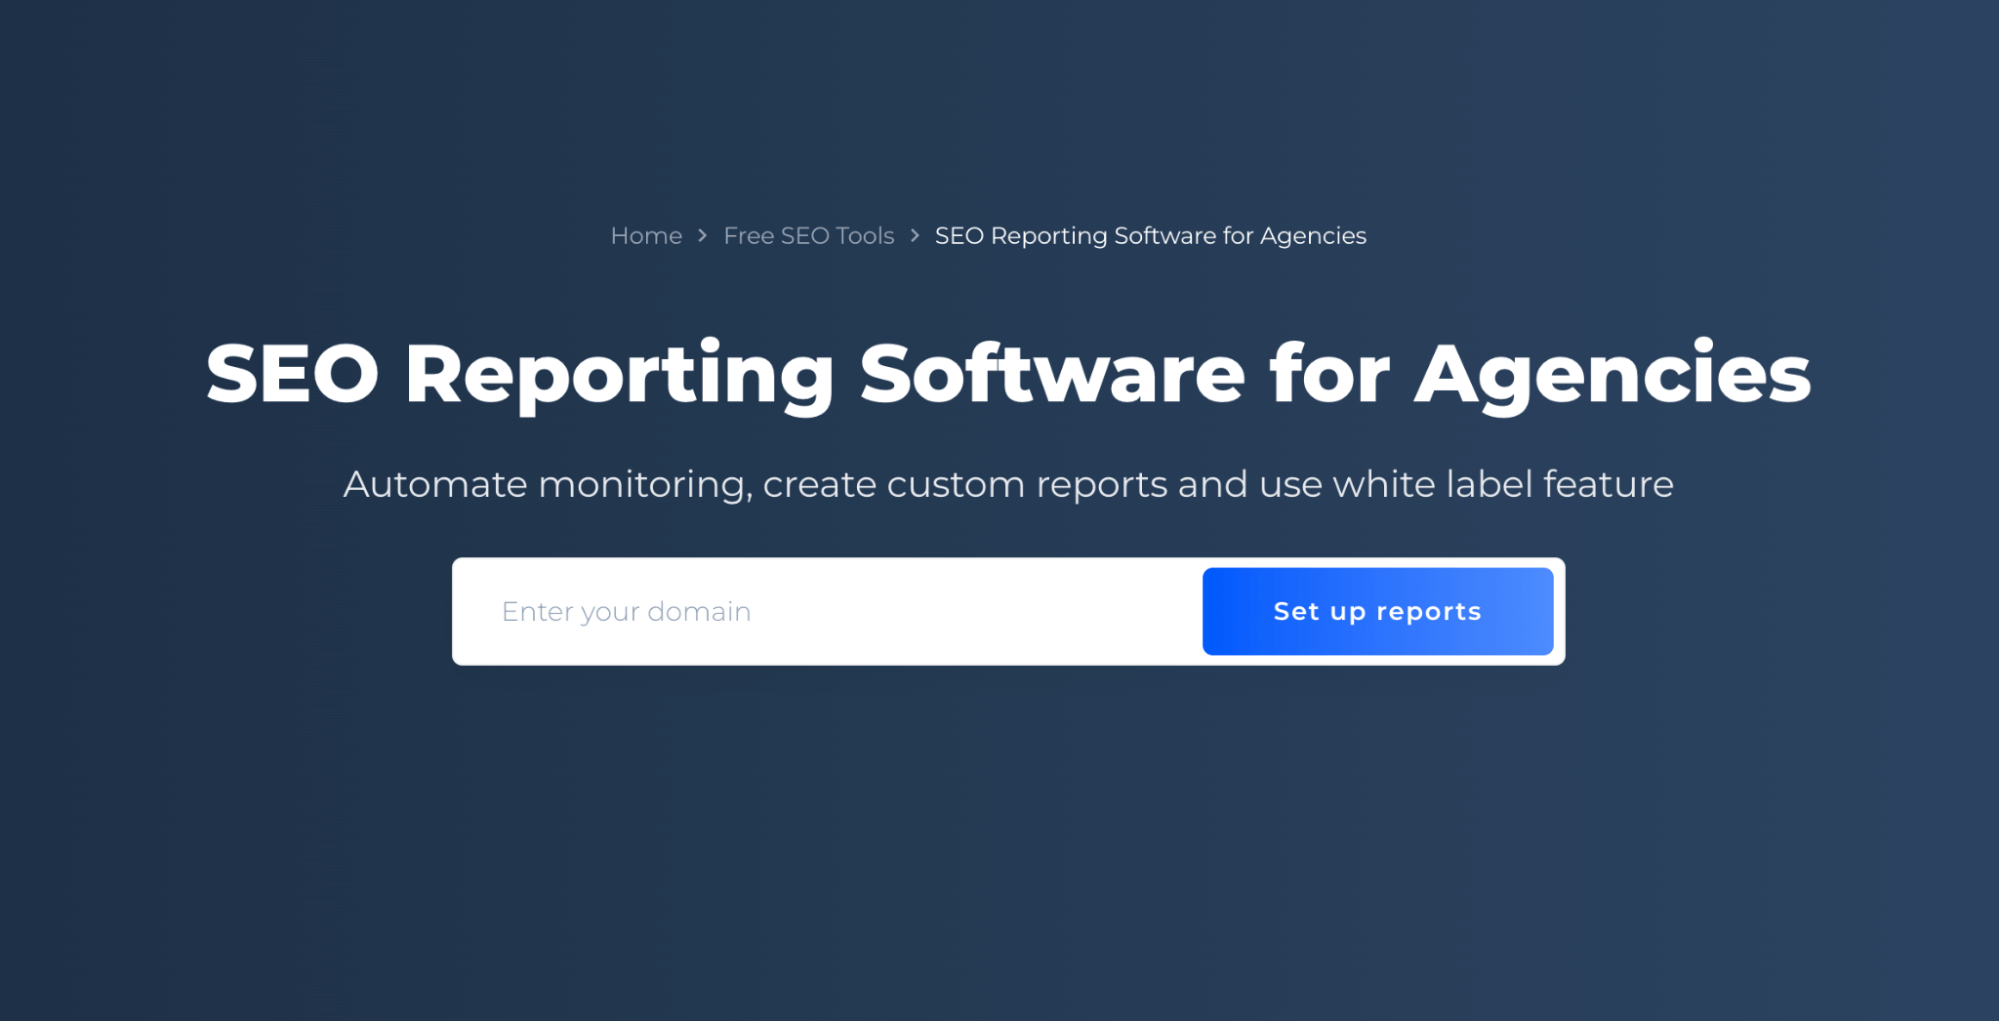 SEO Reporting Software for Agencies